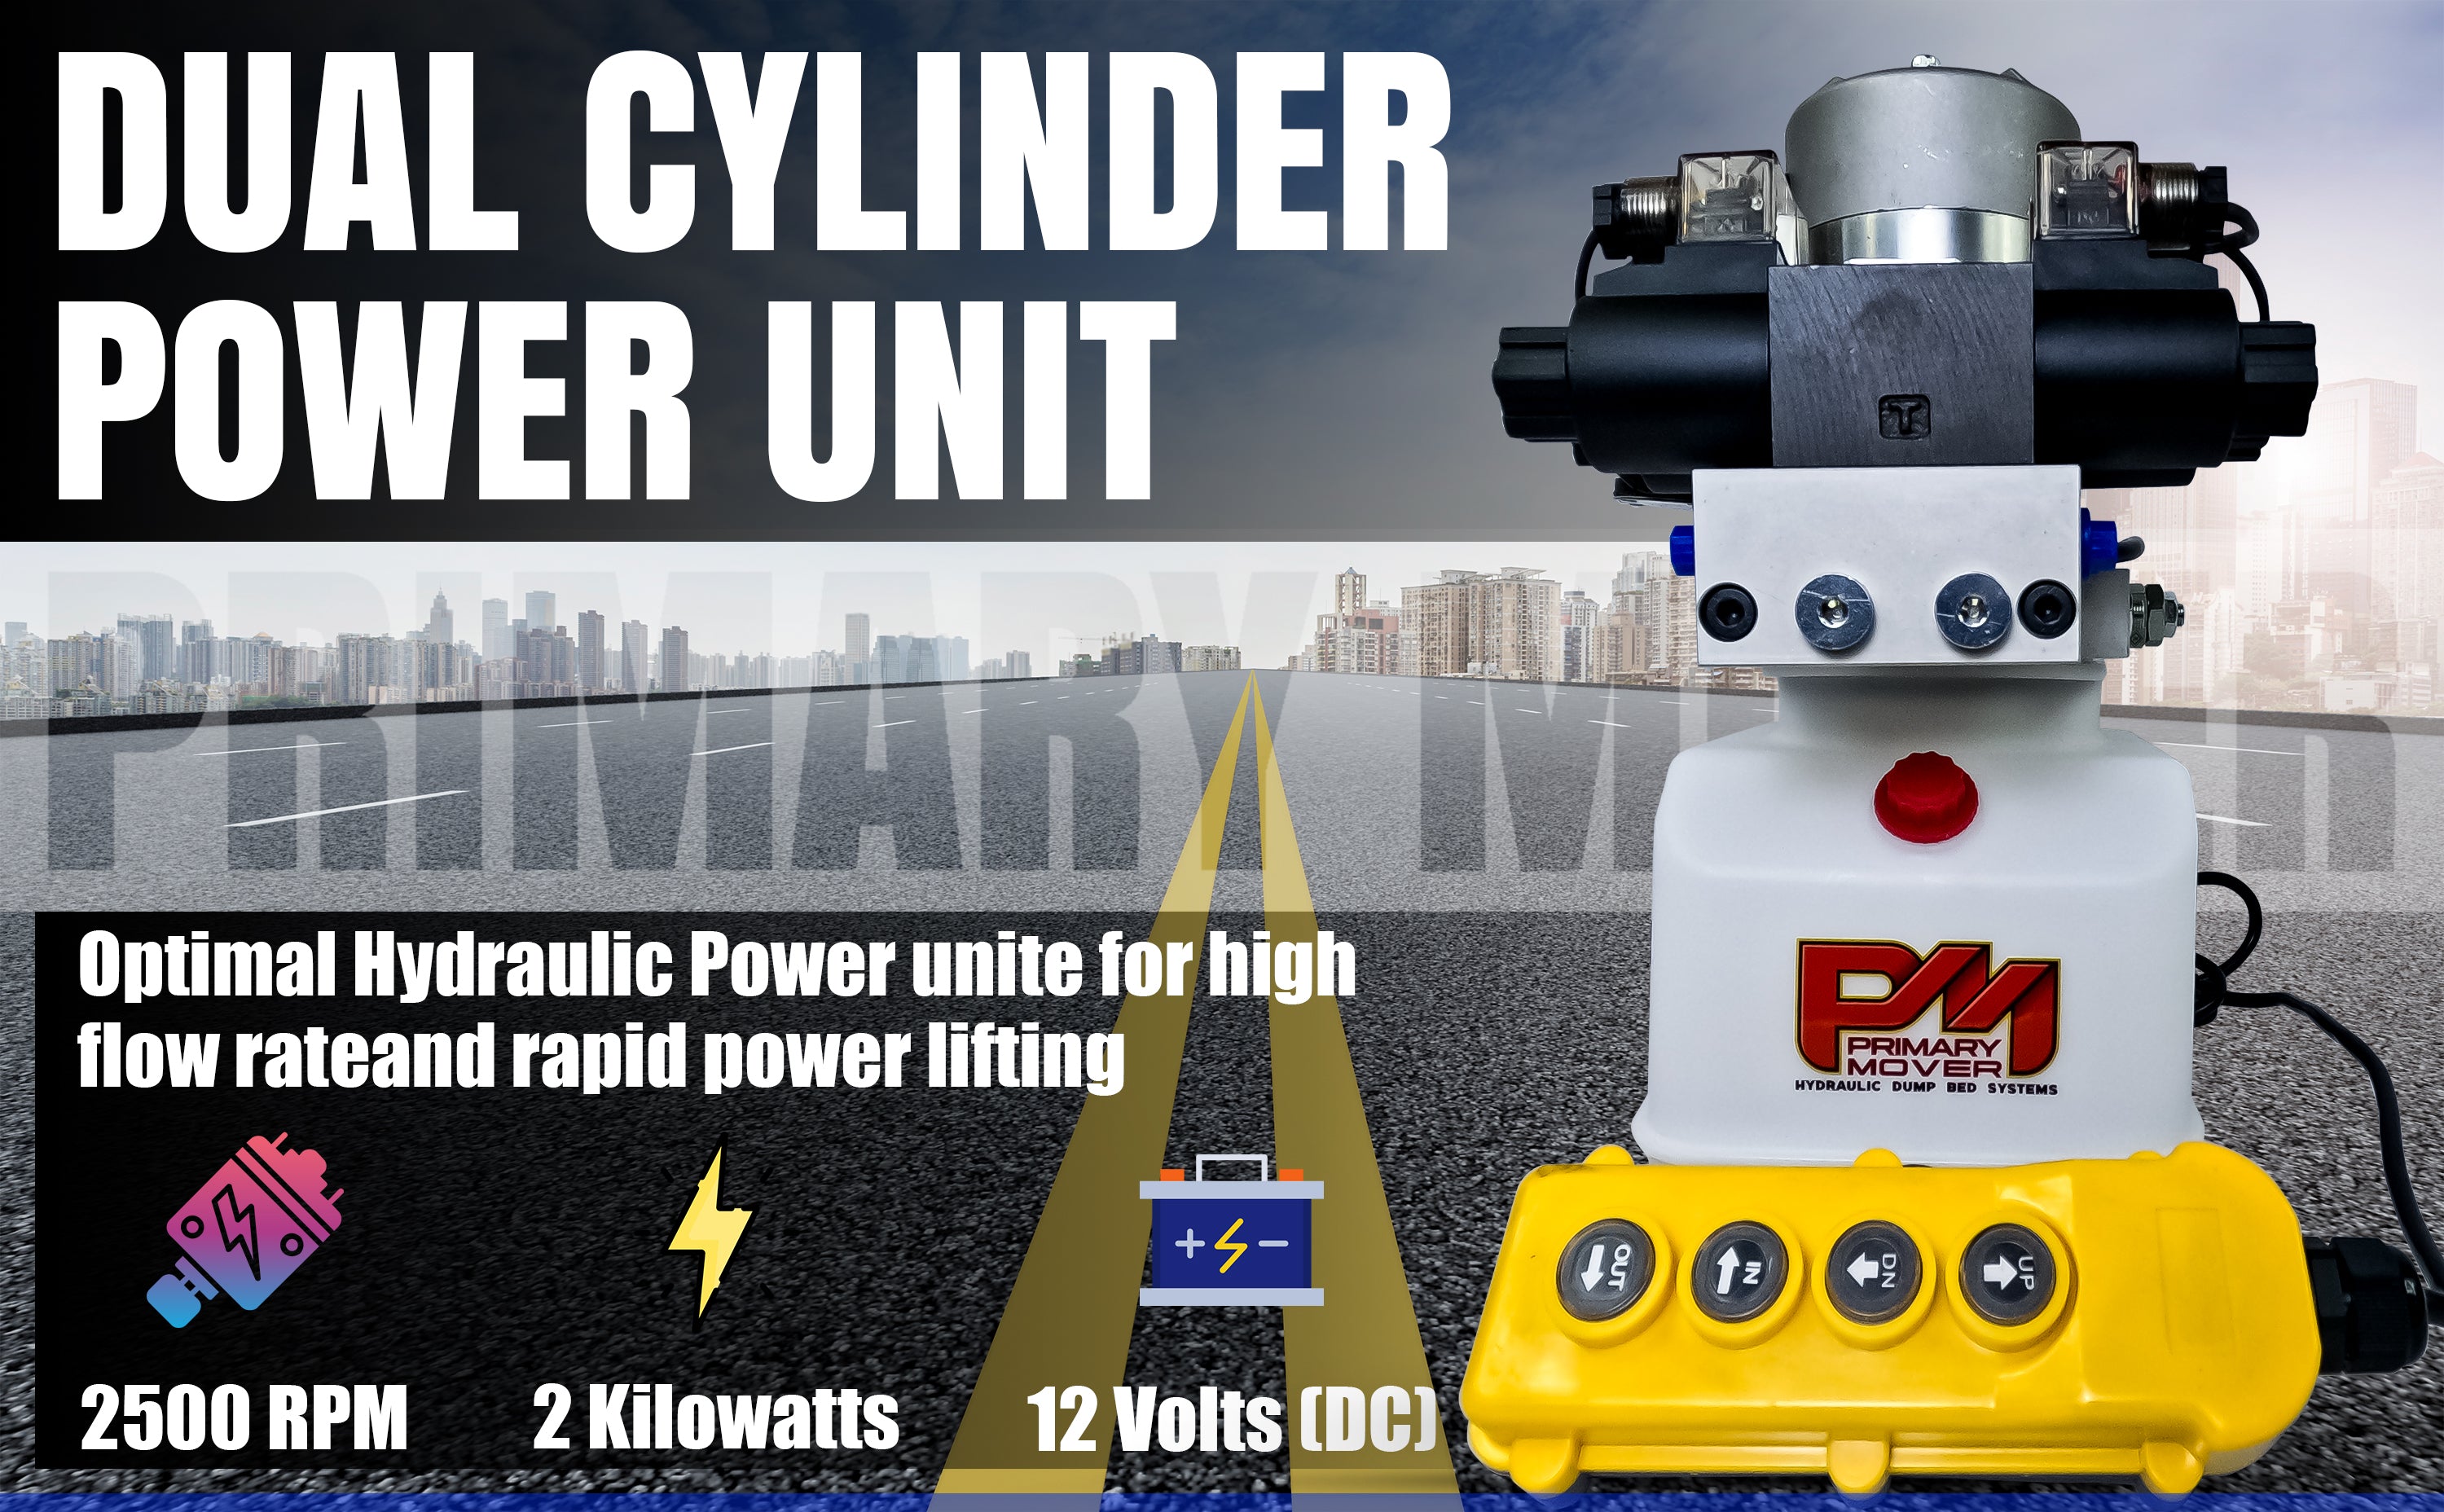 Primary Mover 12V Dual Double-Acting Hydraulic Power Unit in action, showcasing quad power capability for dump trailers and trucks.